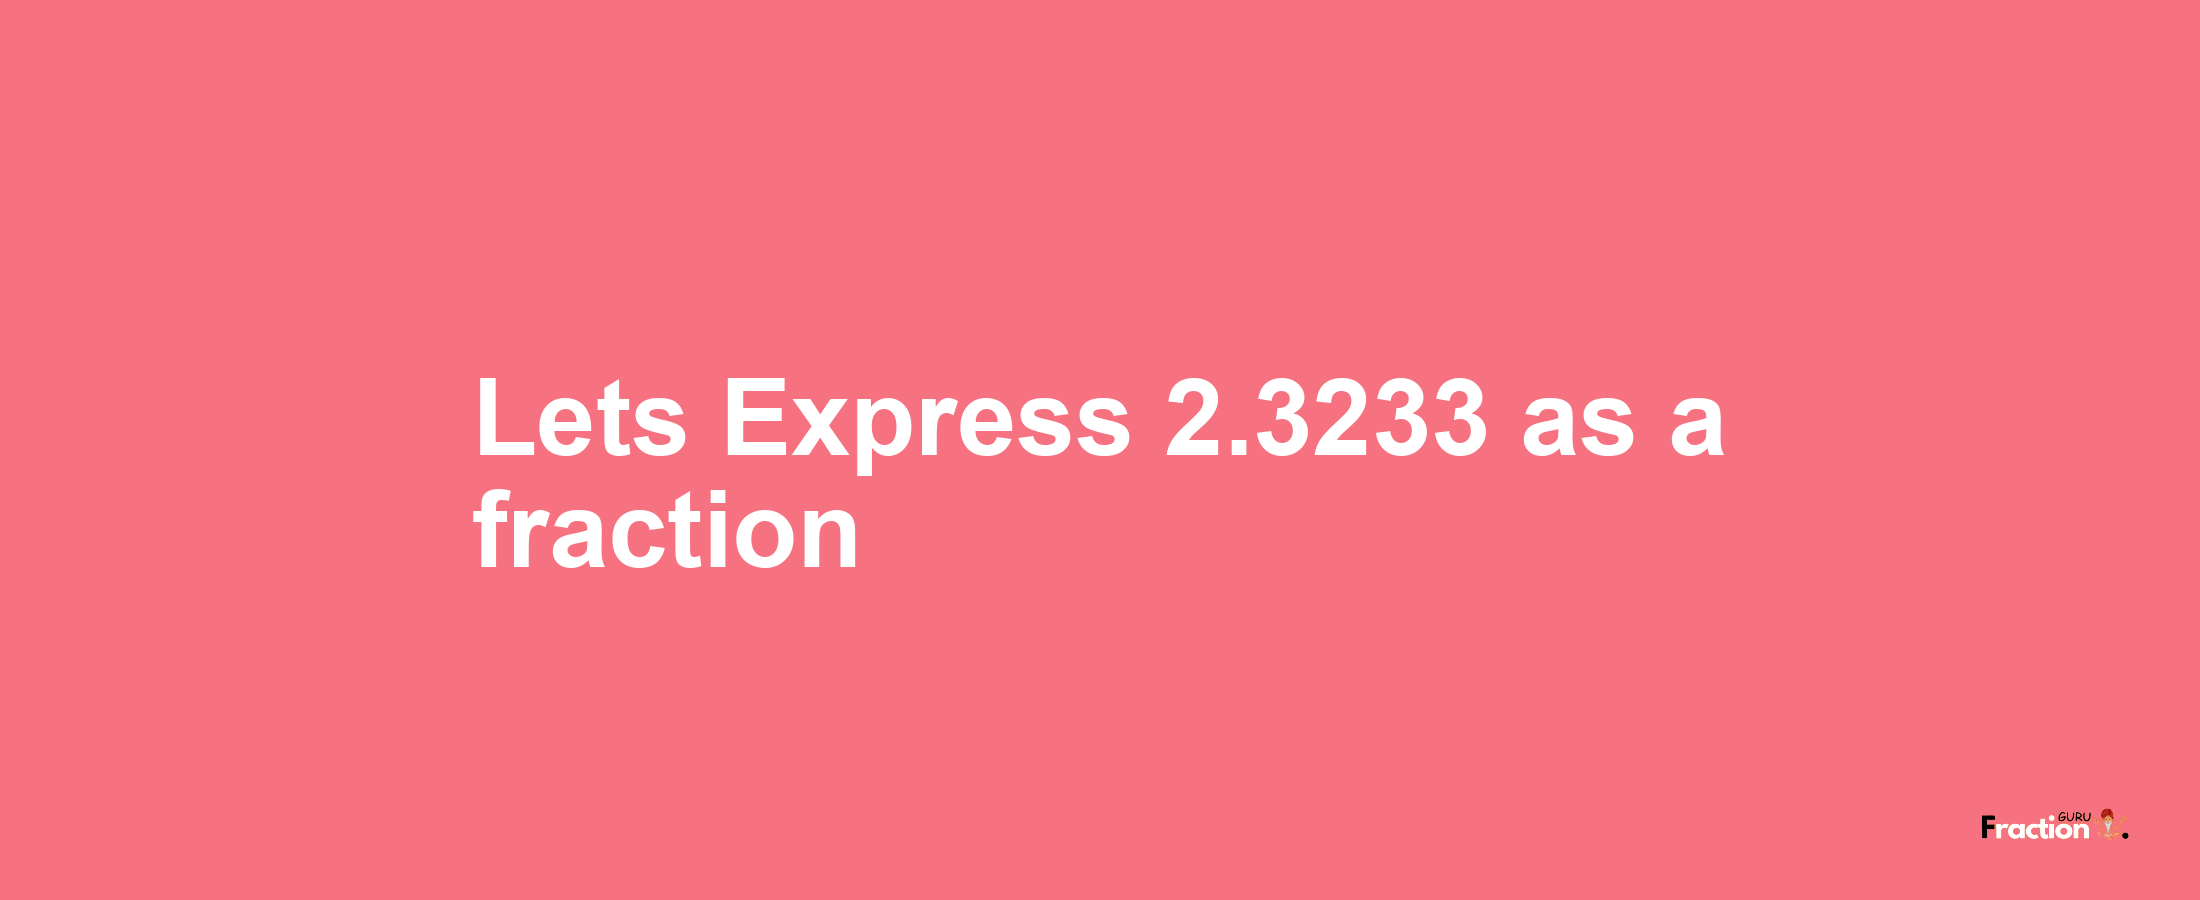 Lets Express 2.3233 as afraction